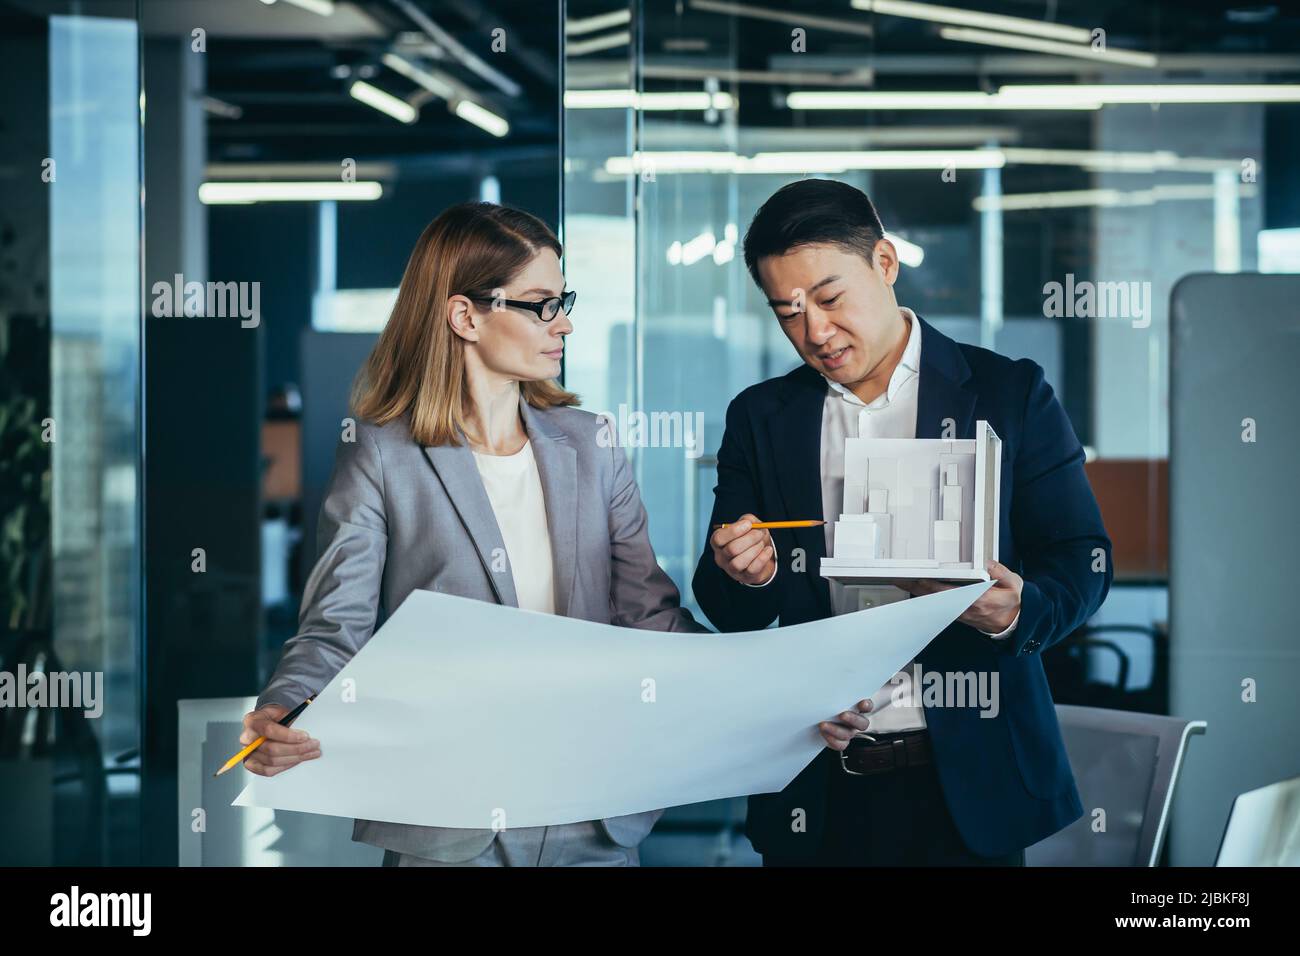 Group young creative engineers Developers discussing new project standing in office reading a blueprint. Team architect designer conversations Asian m Stock Photo